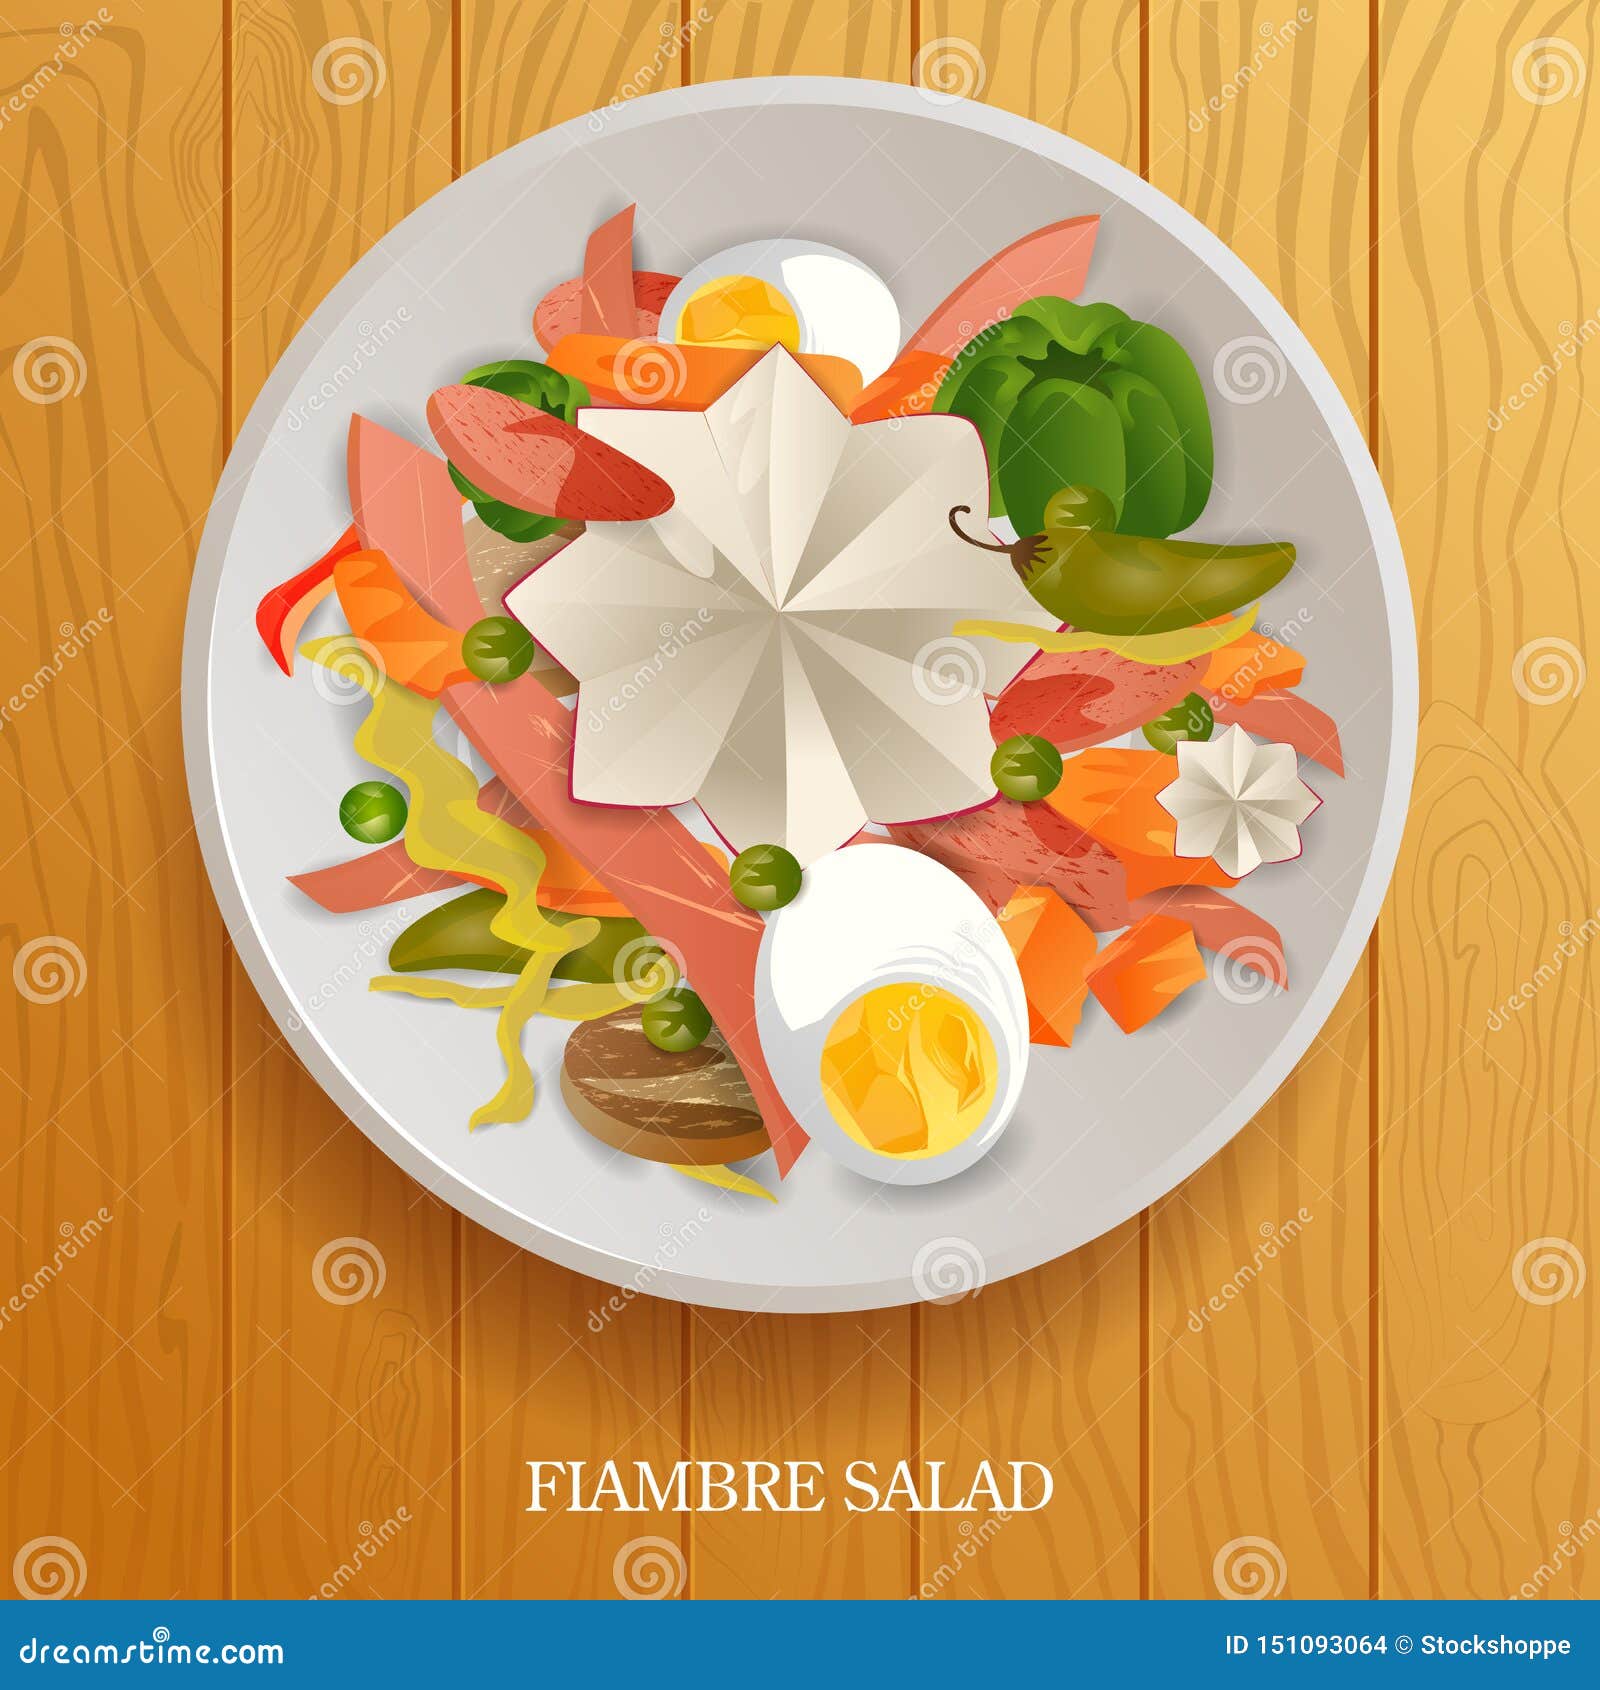 fresh and healthy fiambre salad on wooden background